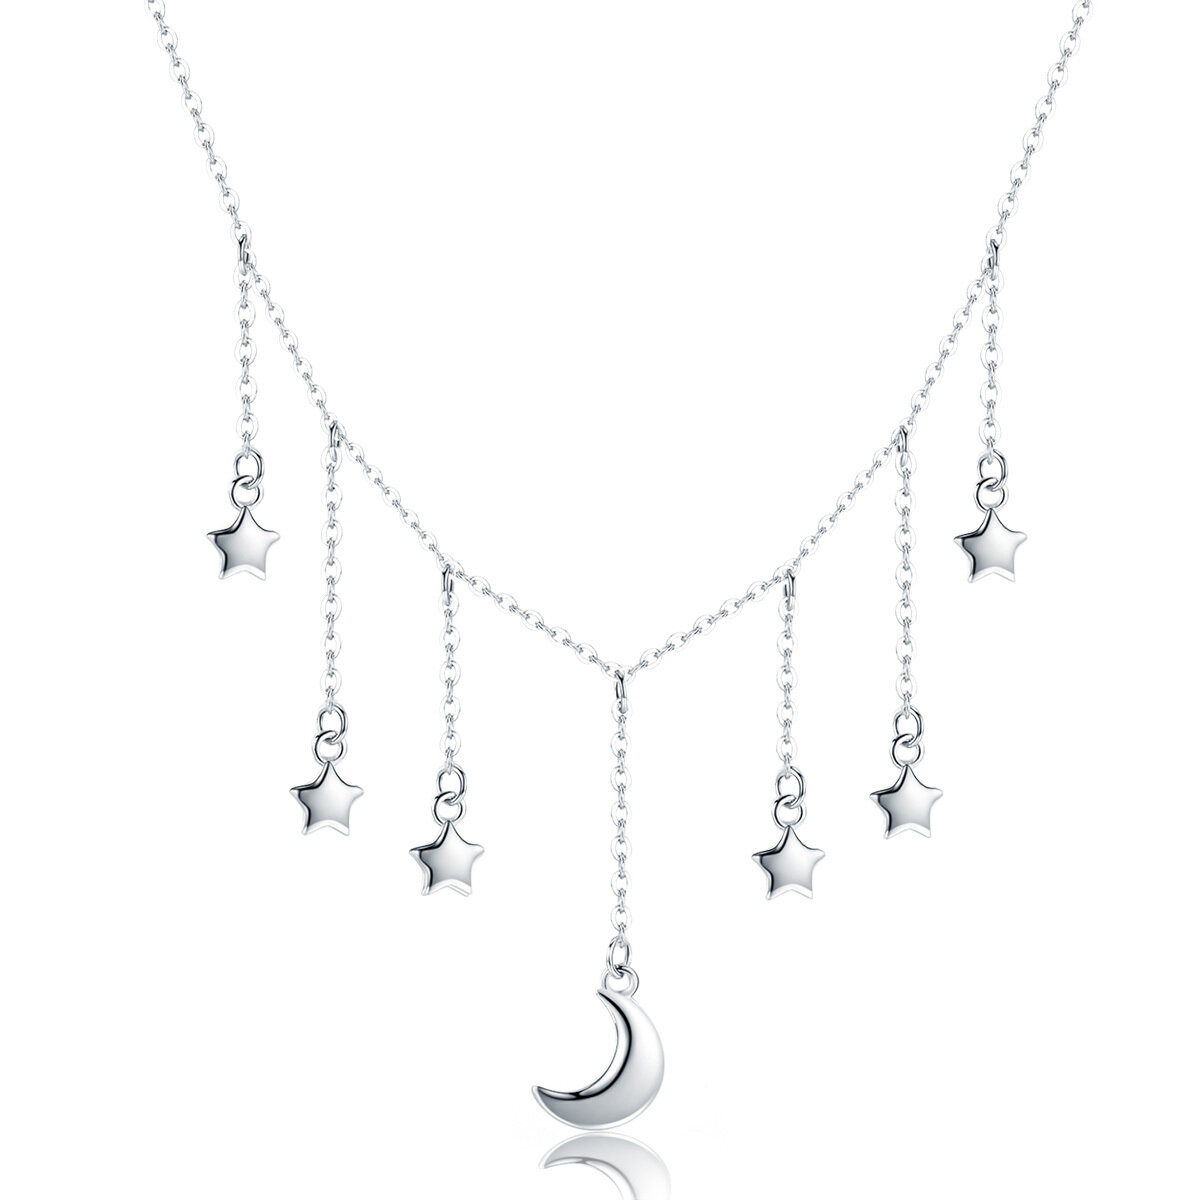 GemKing SCN301 Starry Sky Bright Star and Moon S925 Sterling Silver Necklace